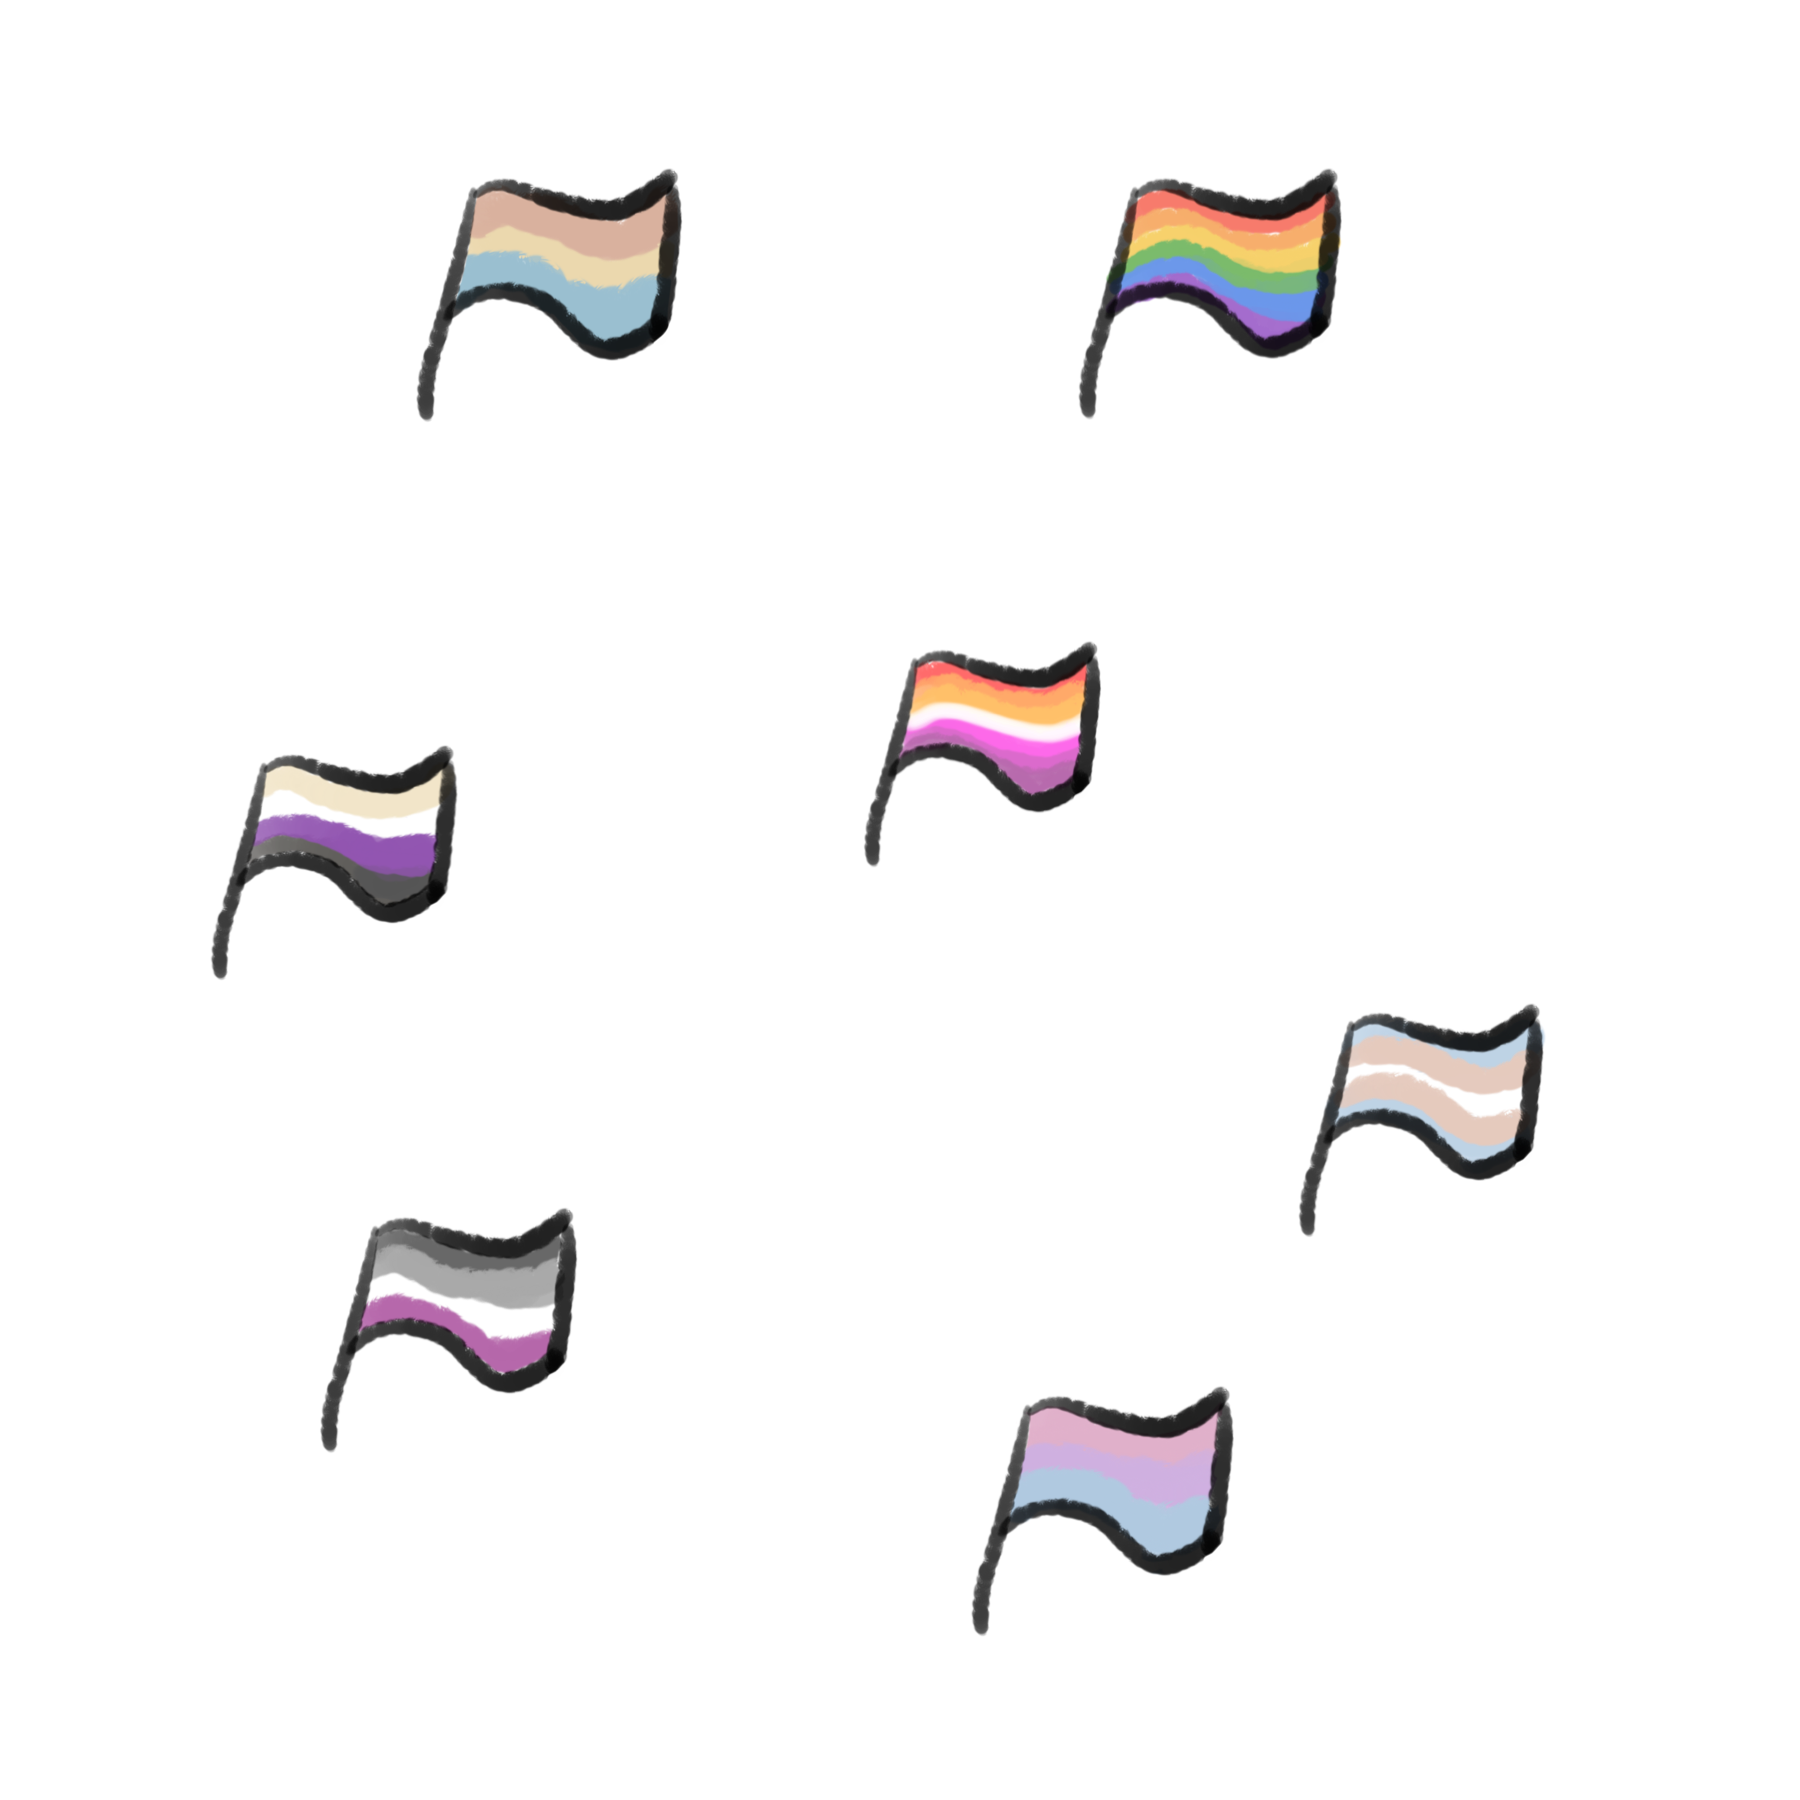 here are some flag icons you can use for pride, if anyone has any others they want me to make lmk 